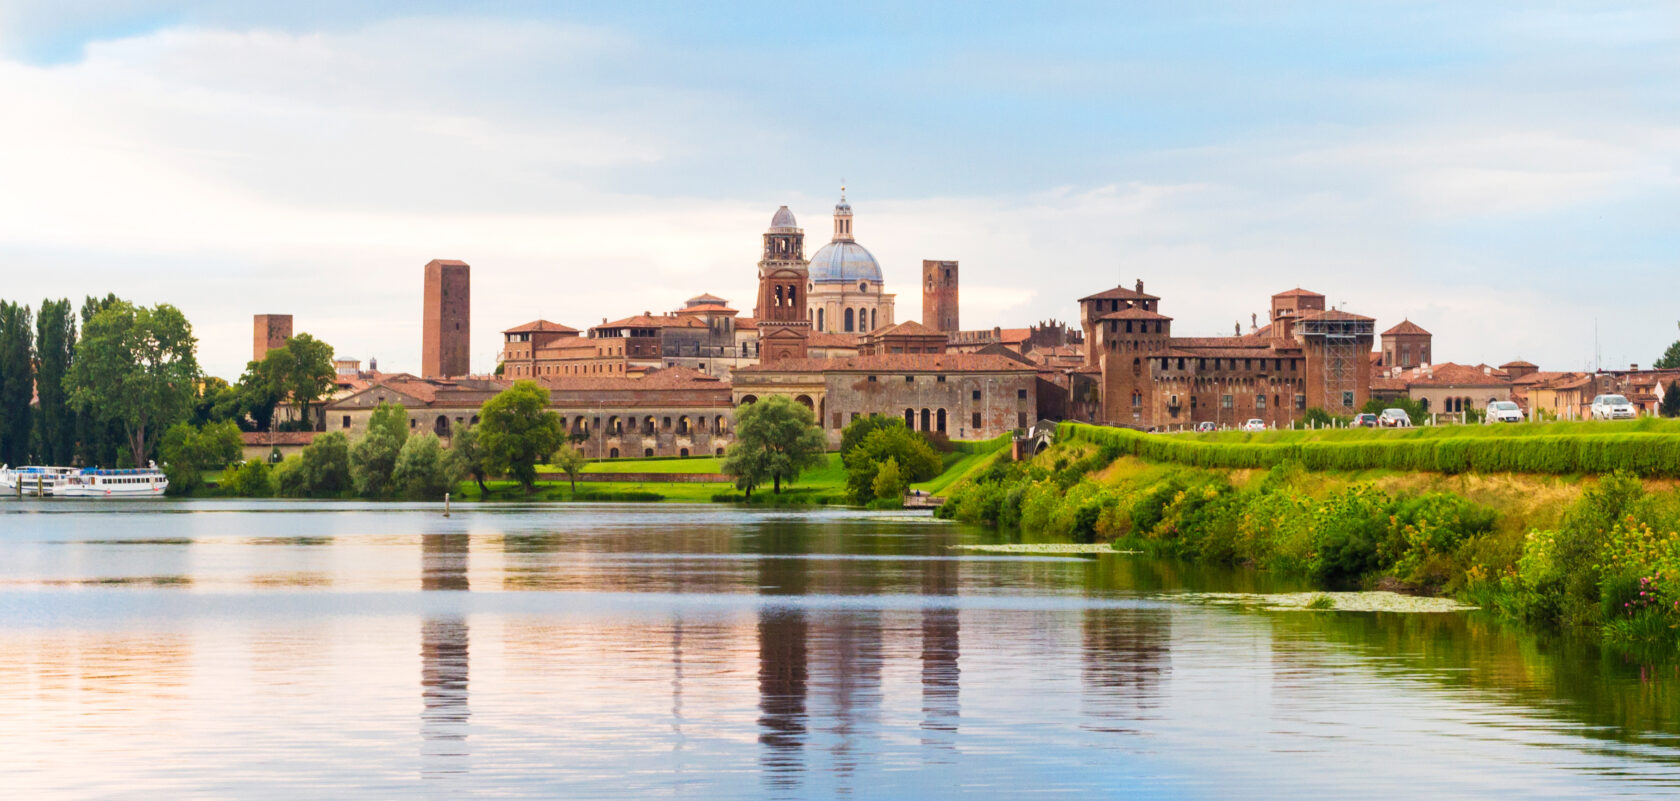 A panoramic view of the city of Mantua, Italy (an Atlantis site).